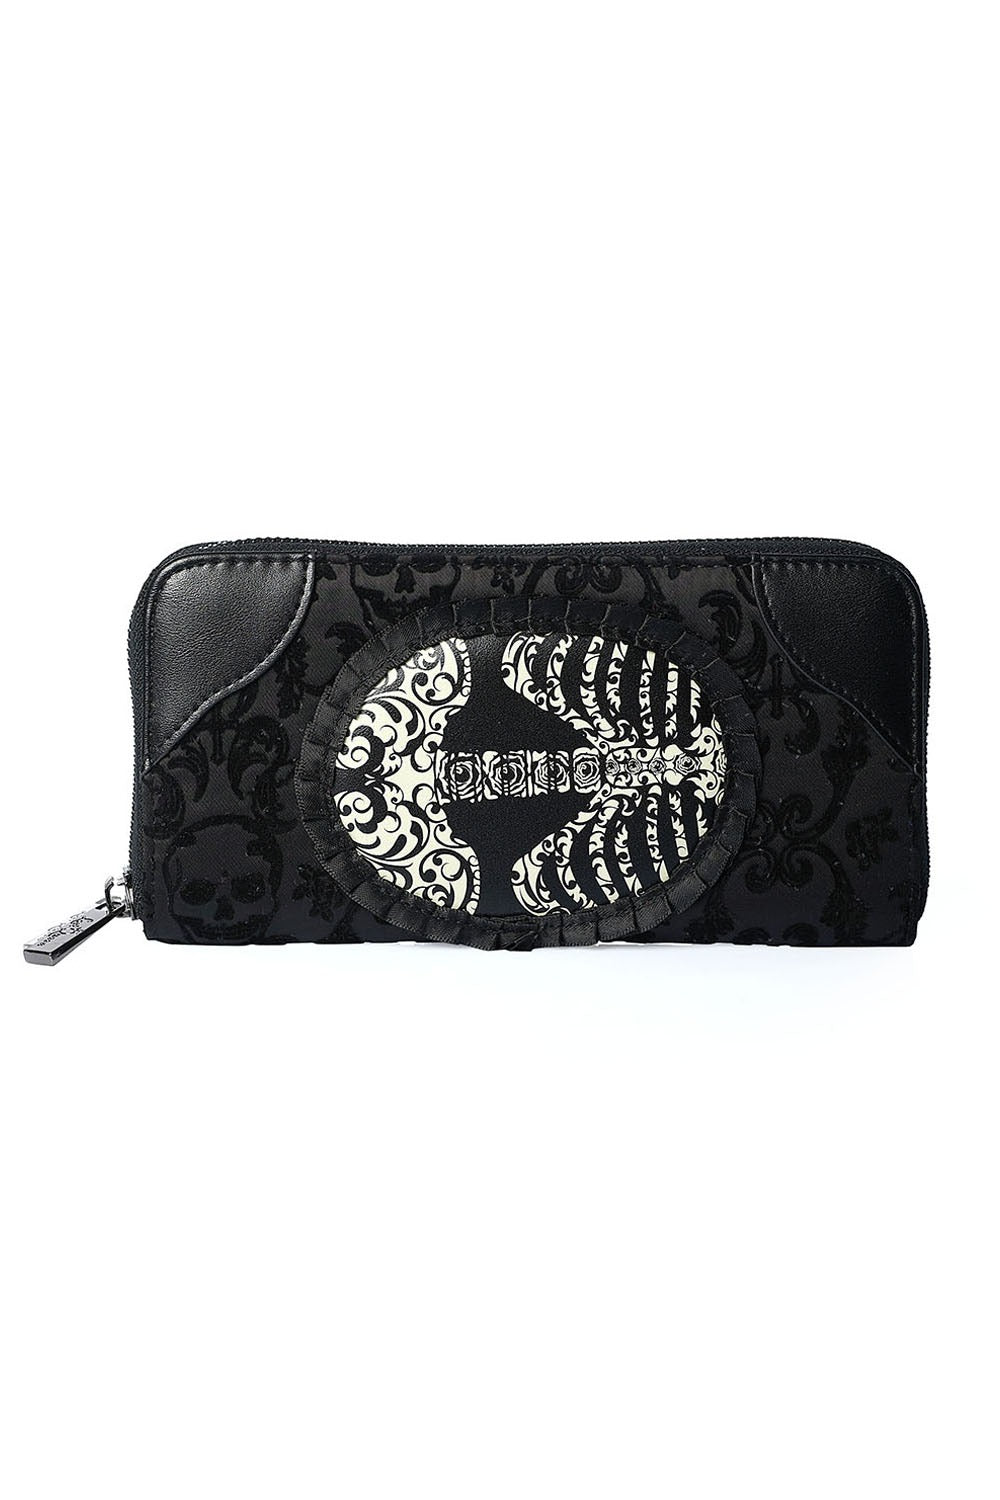 gothic vintage inspired wallet